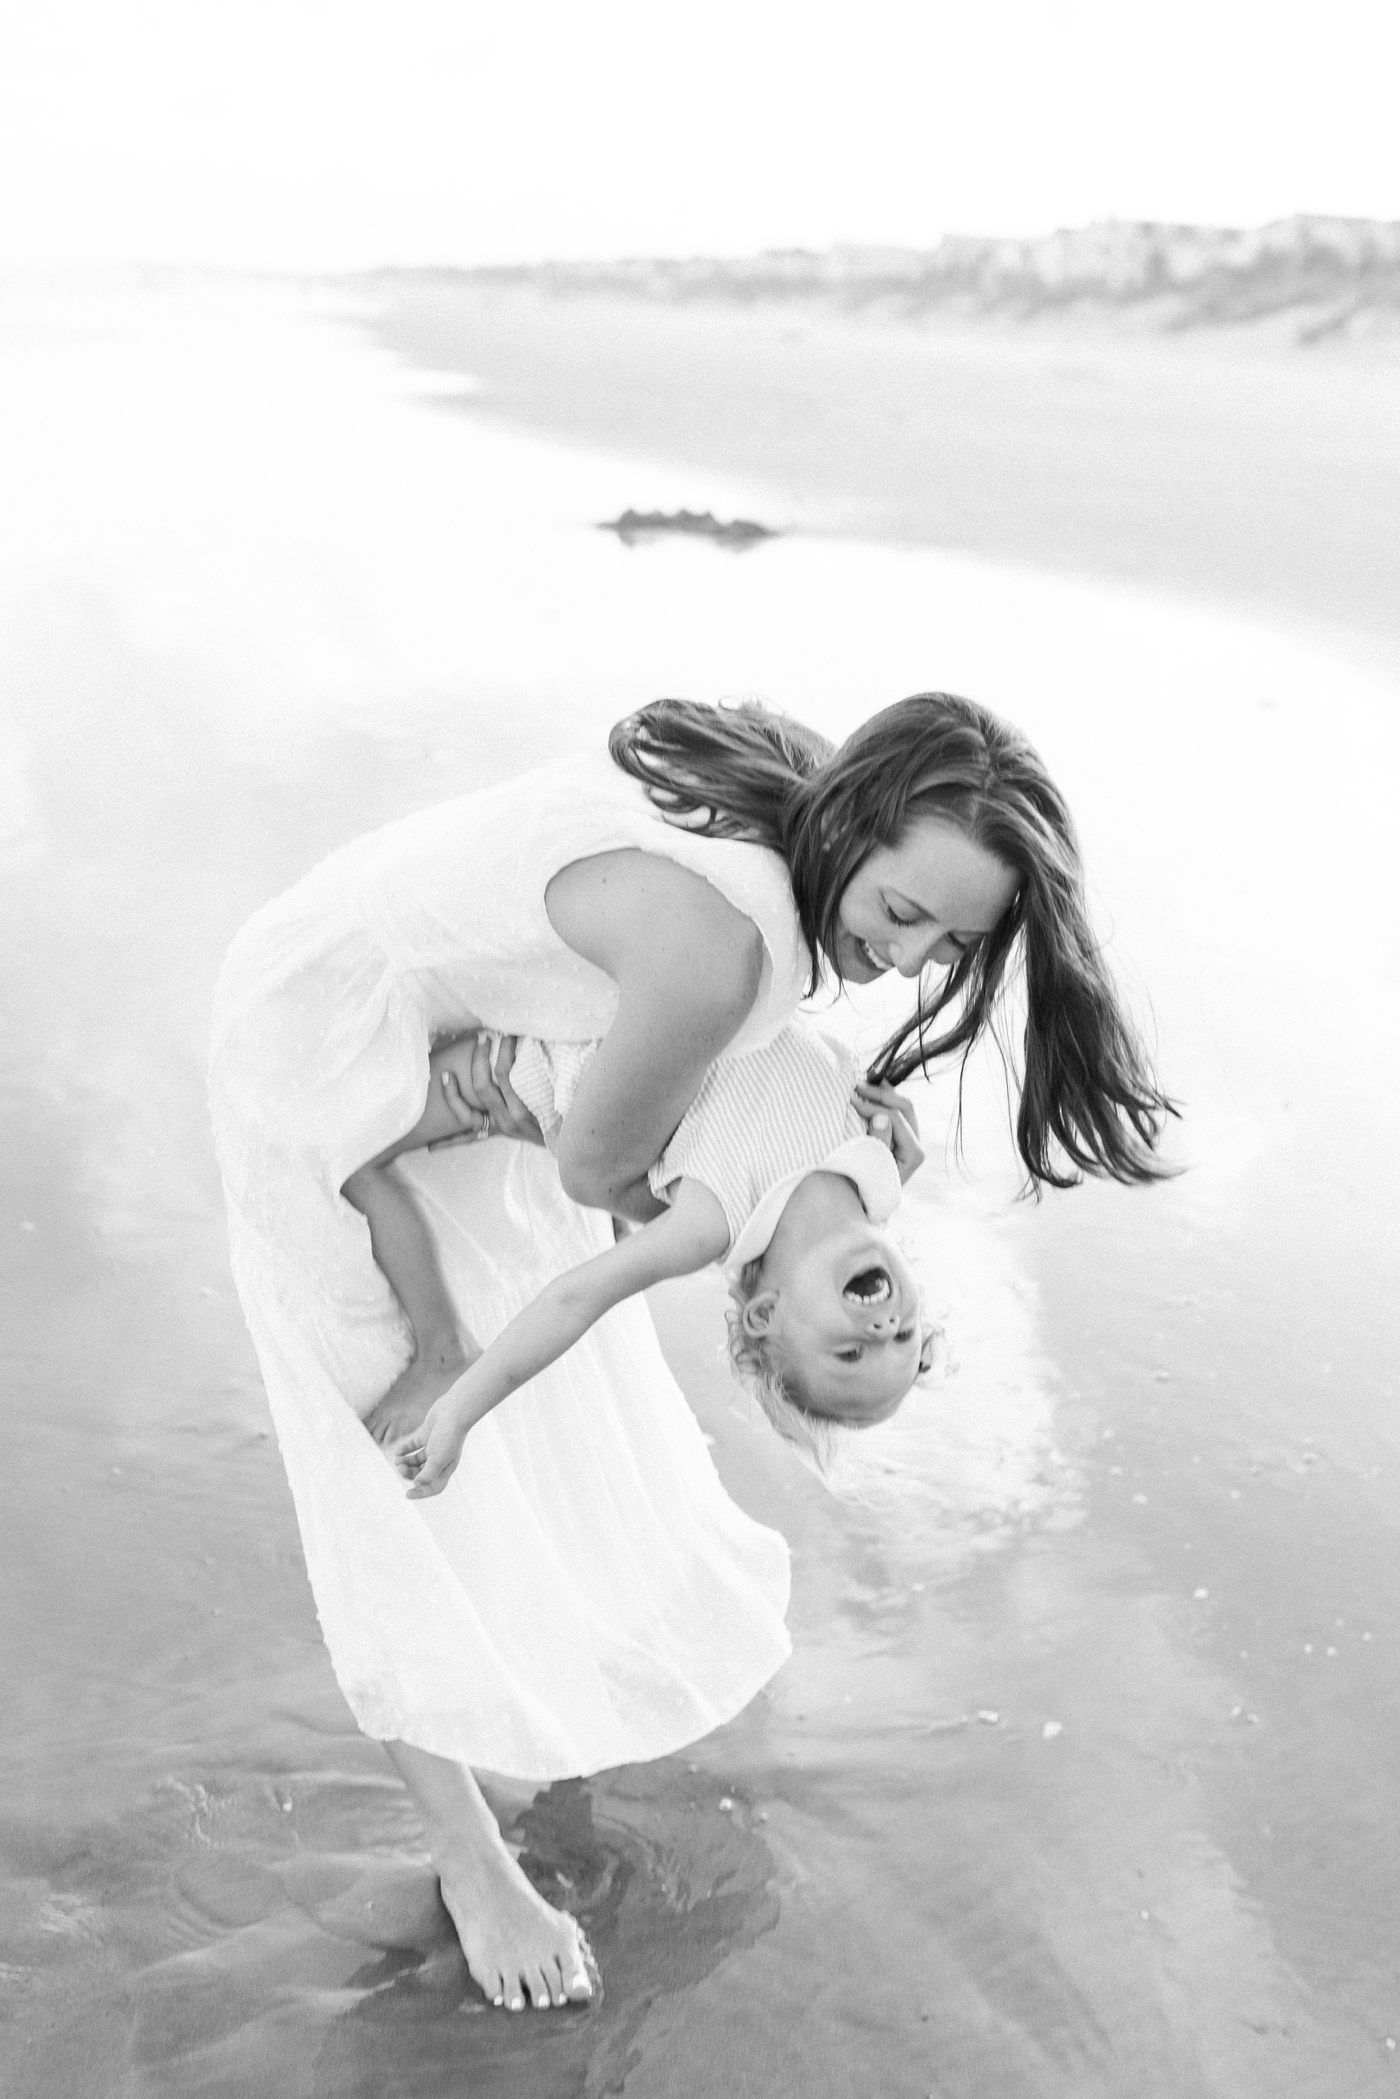 Mom playing with her daughter on the beach | Photo by Caitlyn Motycka Photography.